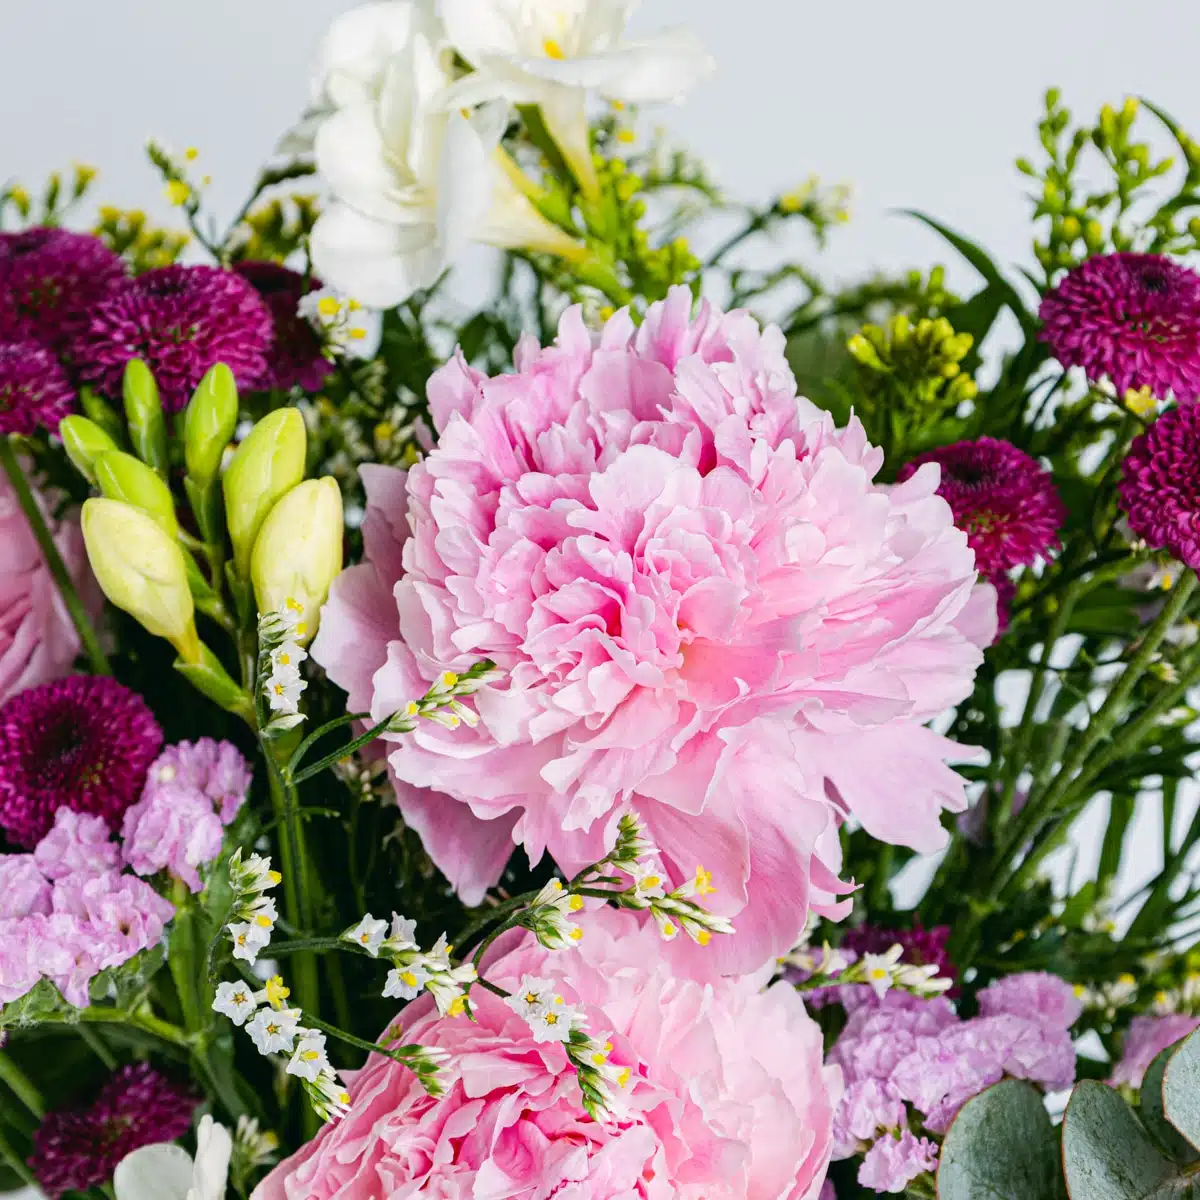 Details from close-up of bouquet of pink peonies and pink freesias